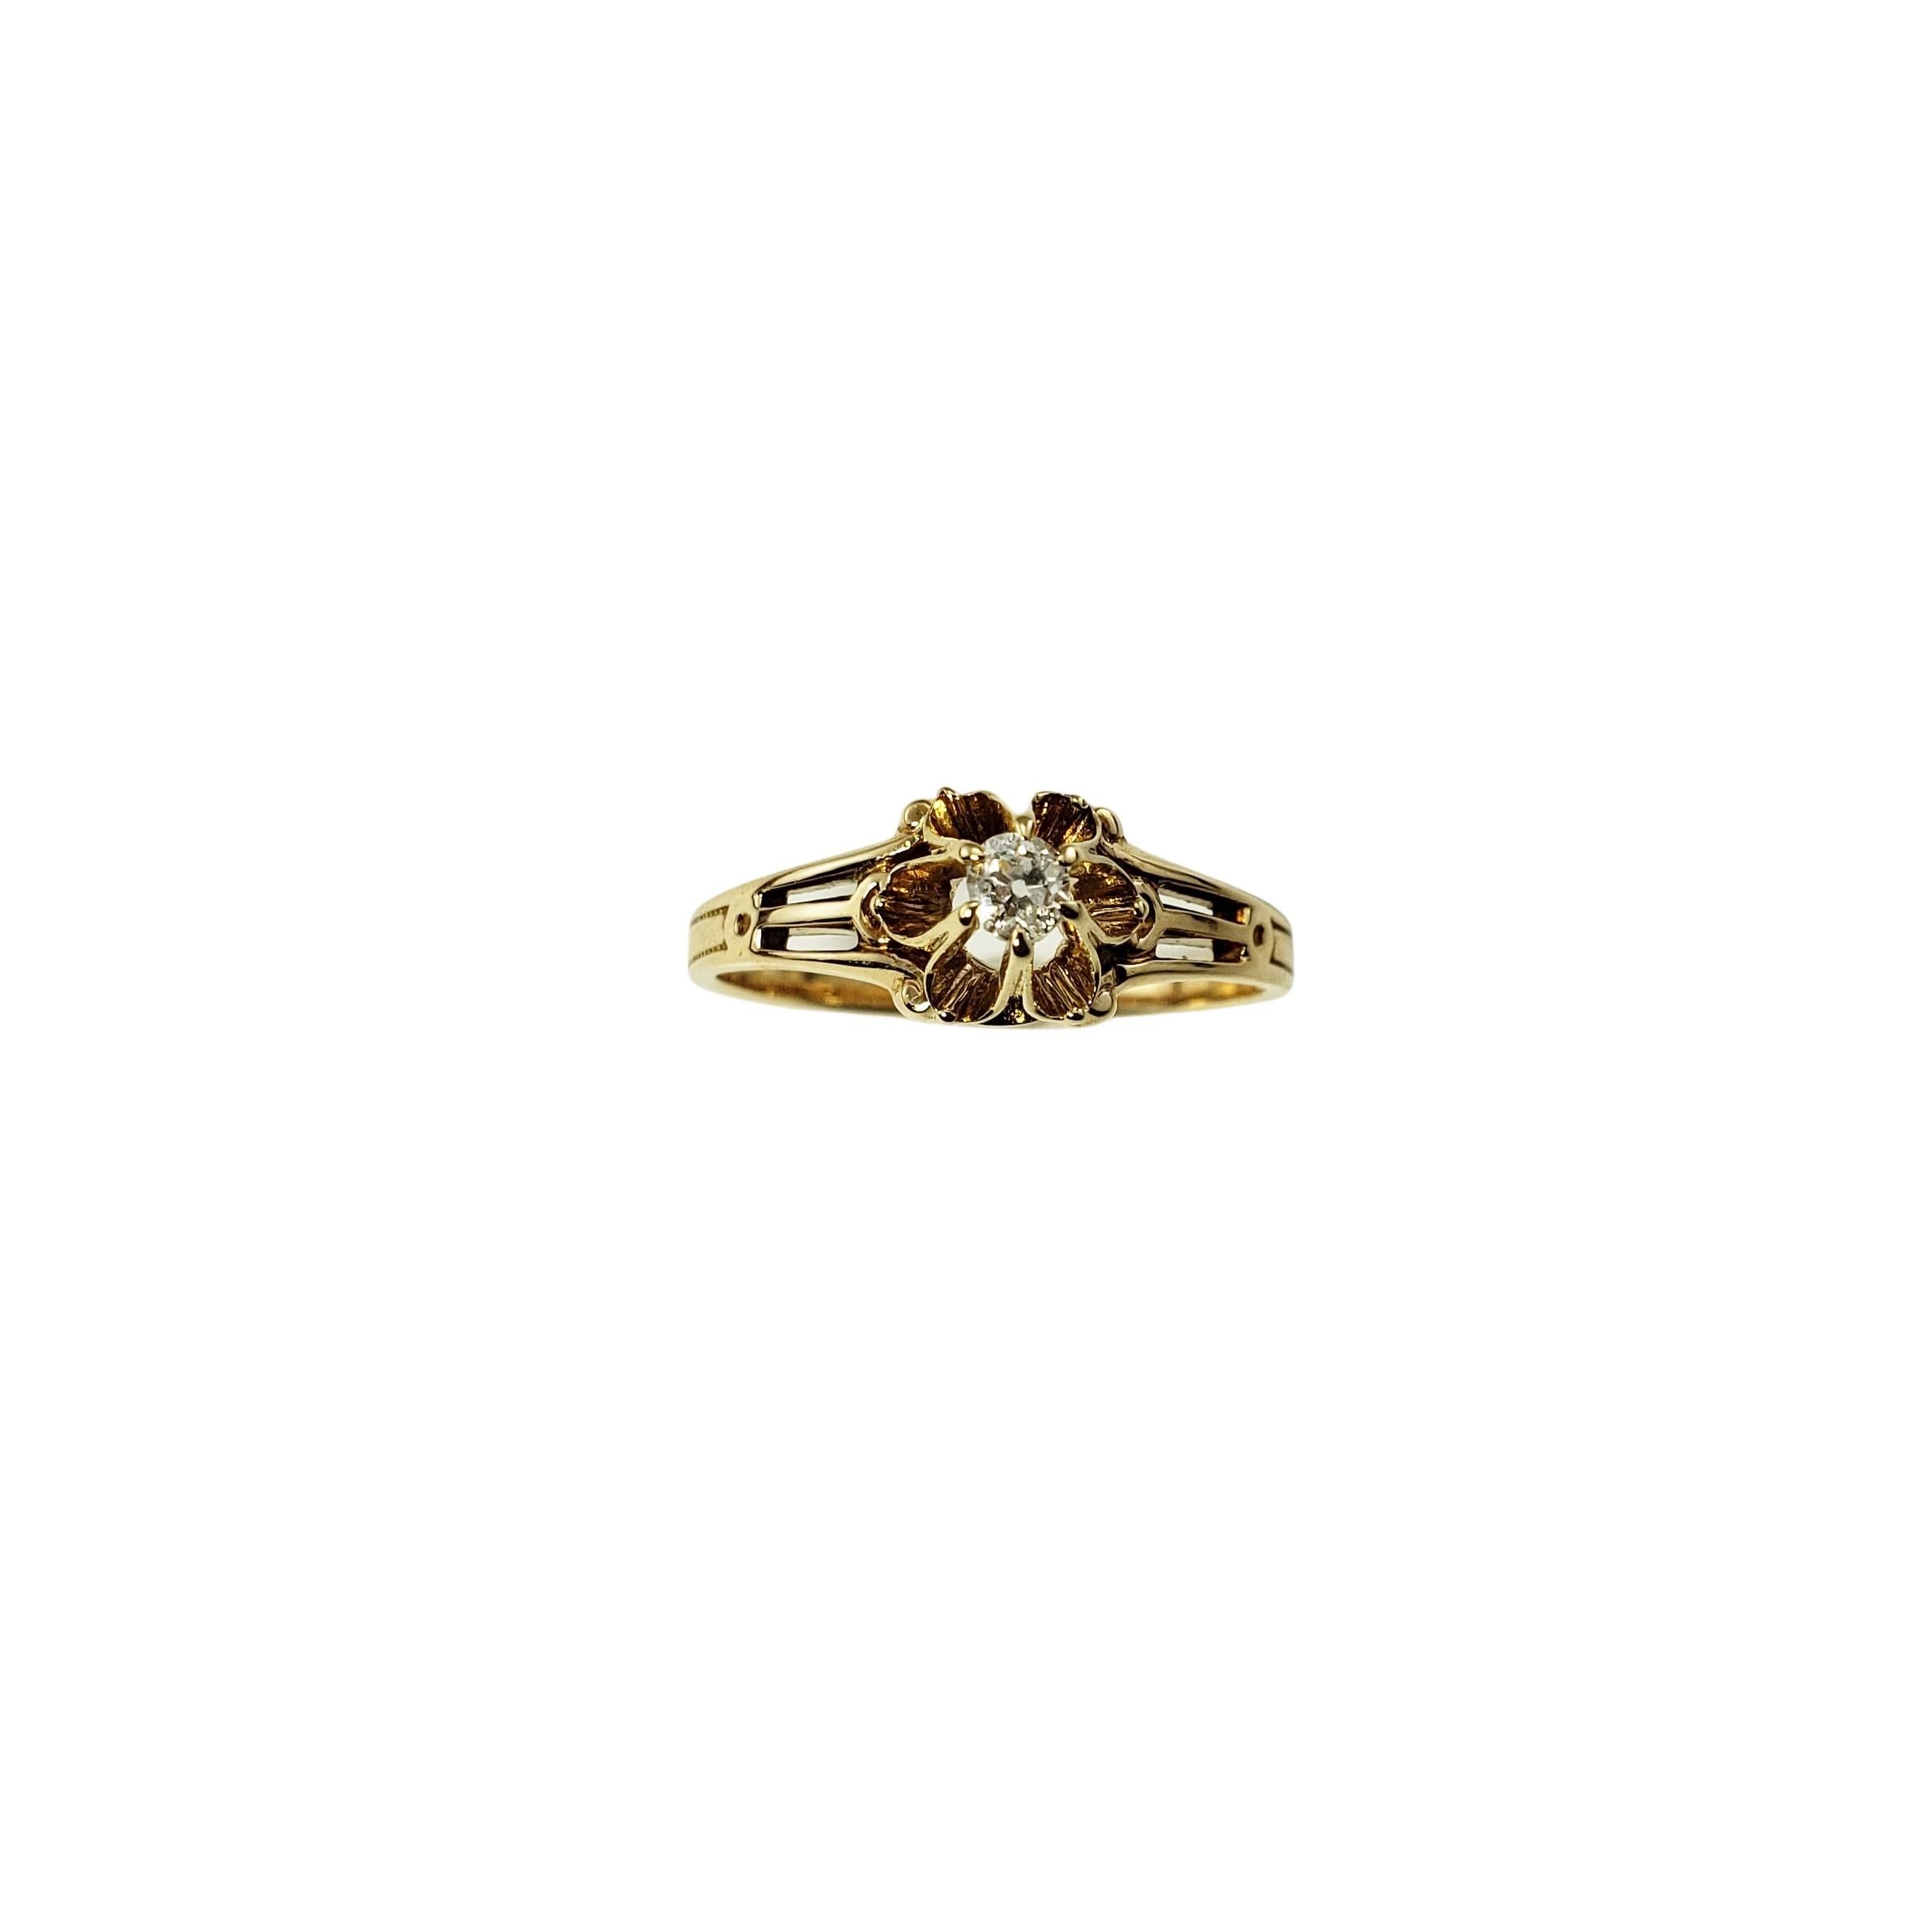 14 Karat Yellow Gold Diamond Engagement Ring Size 7.75-

This sparkling ring features one round old mine cut diamond* set in classic 14K yellow gold.  Shank:  2 mm.
*Slight chip to stone not visible to naked eye.

Approximate total diamond weight: 